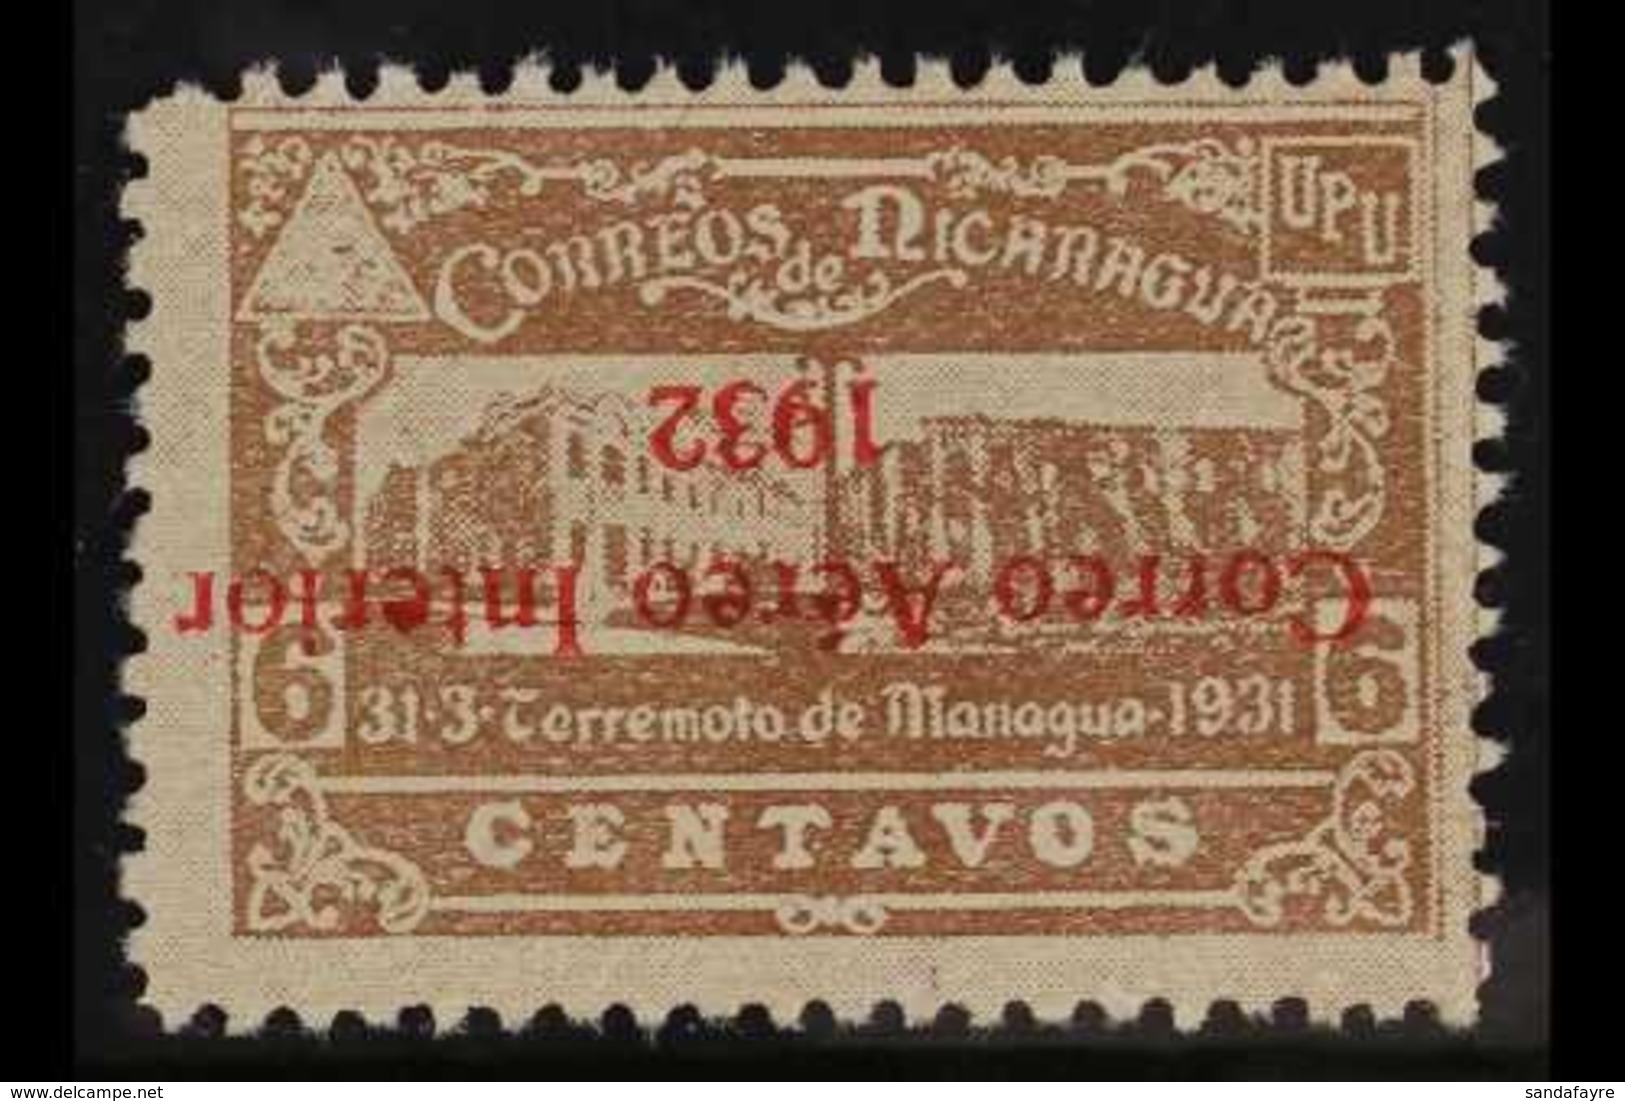 1932 6c Grey-brown Air With INVERTED OVERPRINT Variety (Scott C37a, SG 699a), Fine Unhinged Unused No Gum As Issued, Ver - Nicaragua